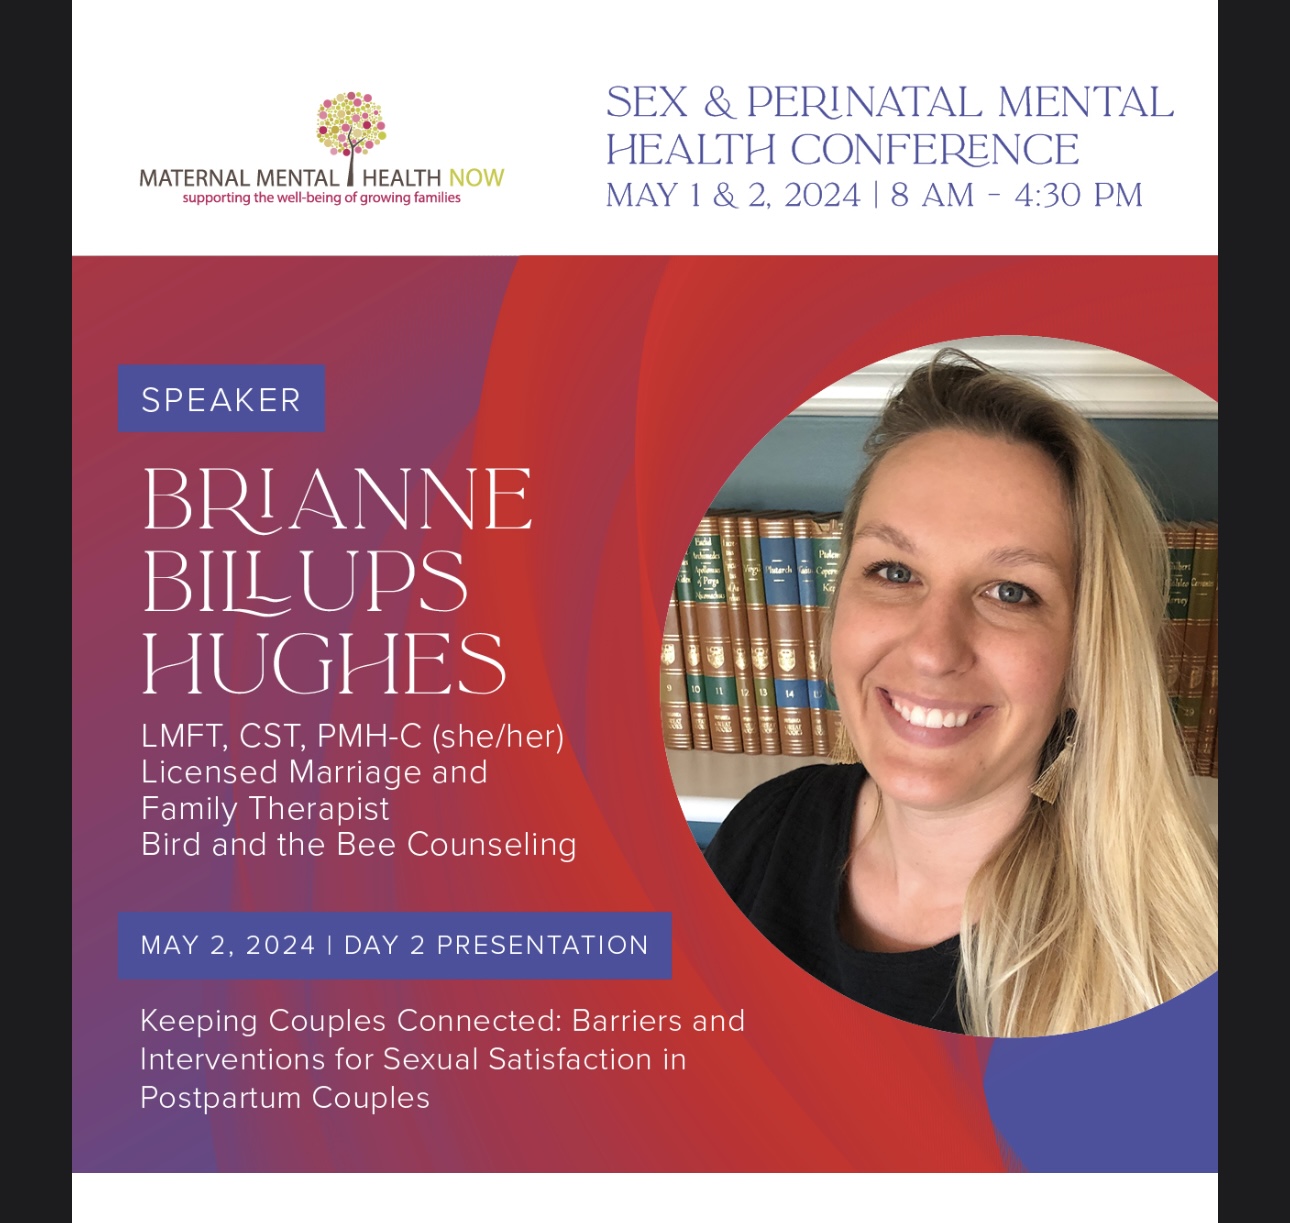 Flier showing Brianne Billups Hughes Licensed Marriage and Family Therapist LMFT, AASECT Certified Sex Therapist CST and Perinatal Mental Health Certified PMH-C therapist speaking at the Sex and Perinatal Mental Health Conference in Los Angeles, CA on sex therapy and perinatal mental health for couples sex therapy los angeles, sex therapist los angeles, pregnancy therapist los angeles, pregnancy therapy los angeles, postpartum therapy los angles couples therapy los angeles, couples counsleing los angeles, marriage sex therapy los angeles, marriage counseling los angeles, postpartum sex therapy los angeles sex therapy malibu, sex therapist malibu, pregnancy therapist malibu, pregnancy therapymalibu, postpartum therapy malibu couples therapy malibu, couples counsleing malibu, marriage sex therapy malibu, marriage counseling malibu, postpartum sex therapy malibu sex therapy woodland hills, sex therapist woodland hills, pregnancy therapist woodland hills, pregnancy therapy woodland hills, postpartum therapy woodland hills couples therapy woodland hills, couples counsleing woodland hills, marriage sex therapy woodland hills, marriage counseling woodland hills, postpartum sex therapy woodland hills sex therapy calabasas, sex therapist calabasas, pregnancy therapist calabasas, pregnancy therapy calabasas, postpartum therapy calabasas, couples therapy calabasas, couples counsleing calabasas, marriage sex therapy calabasas, marriage counseling calabasas, postpartum sex therapy calabasas